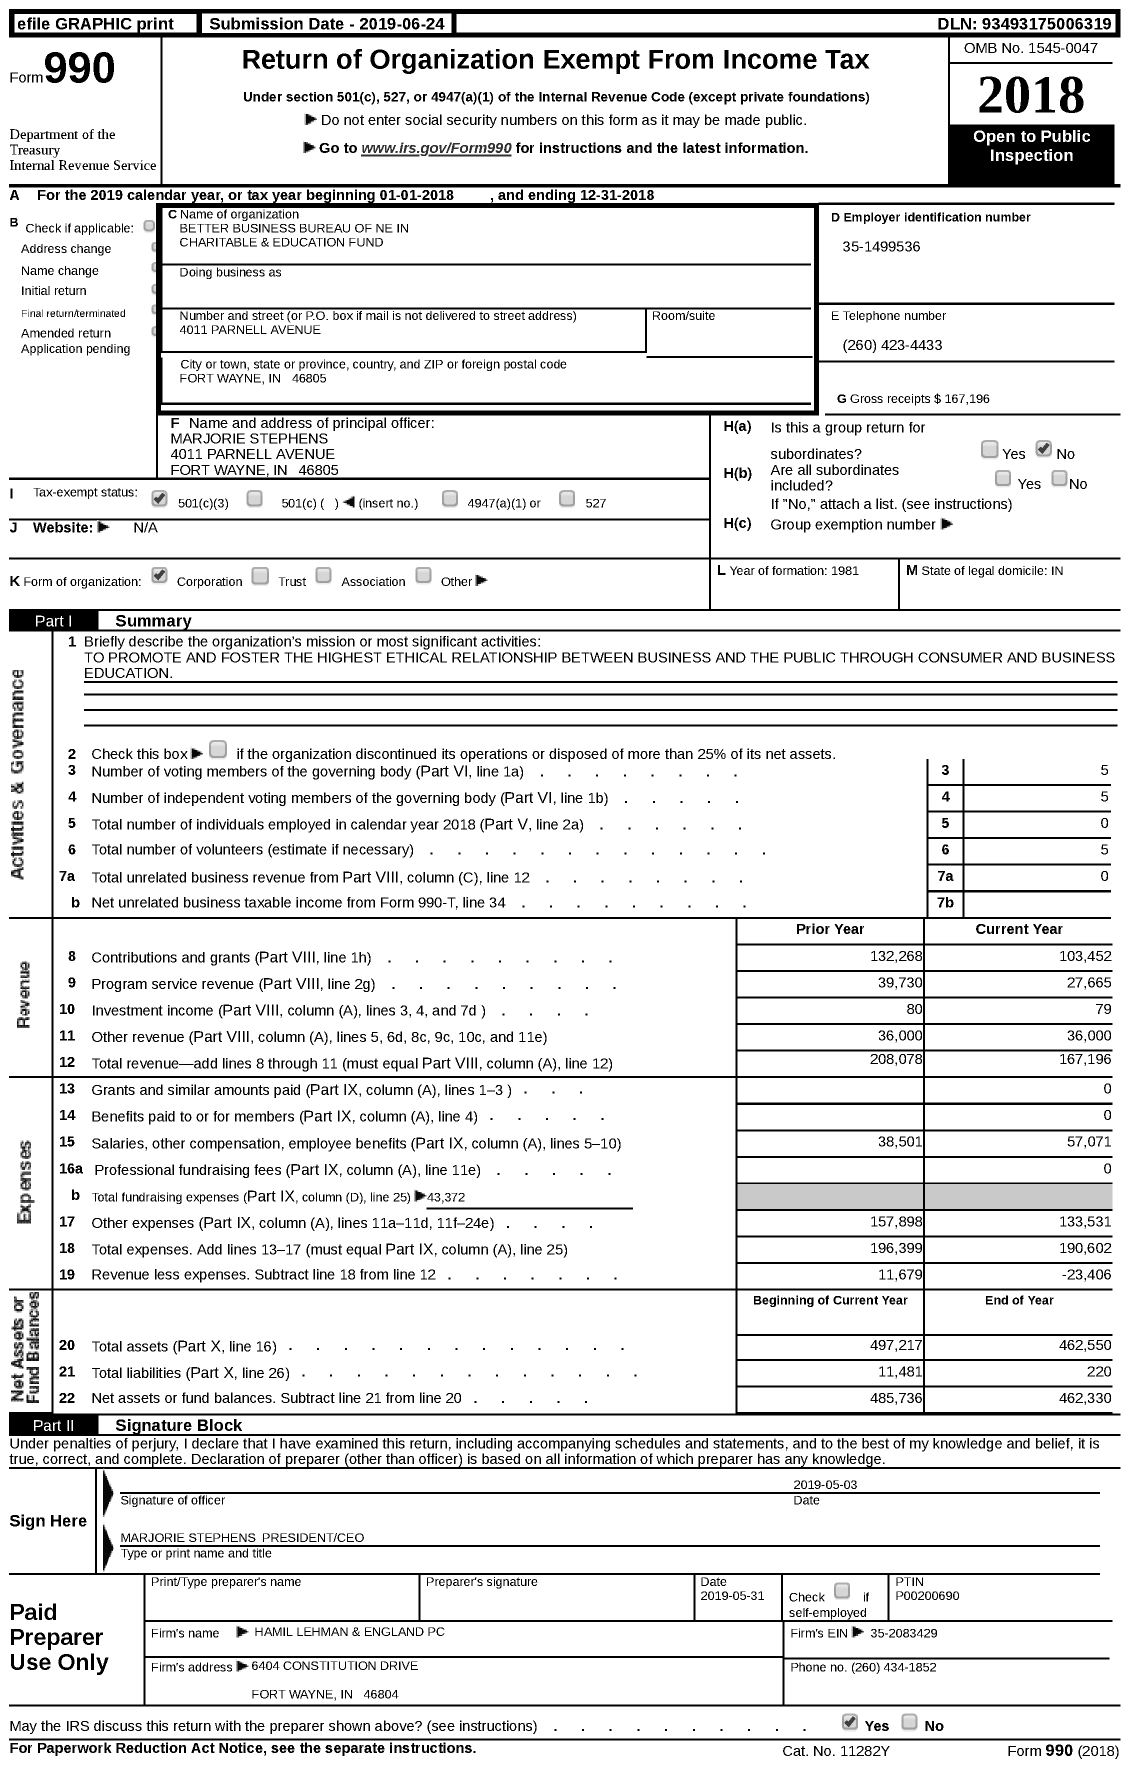 Image of first page of 2018 Form 990 for Better Business Bureau of Ne in Charitable and Education Fund